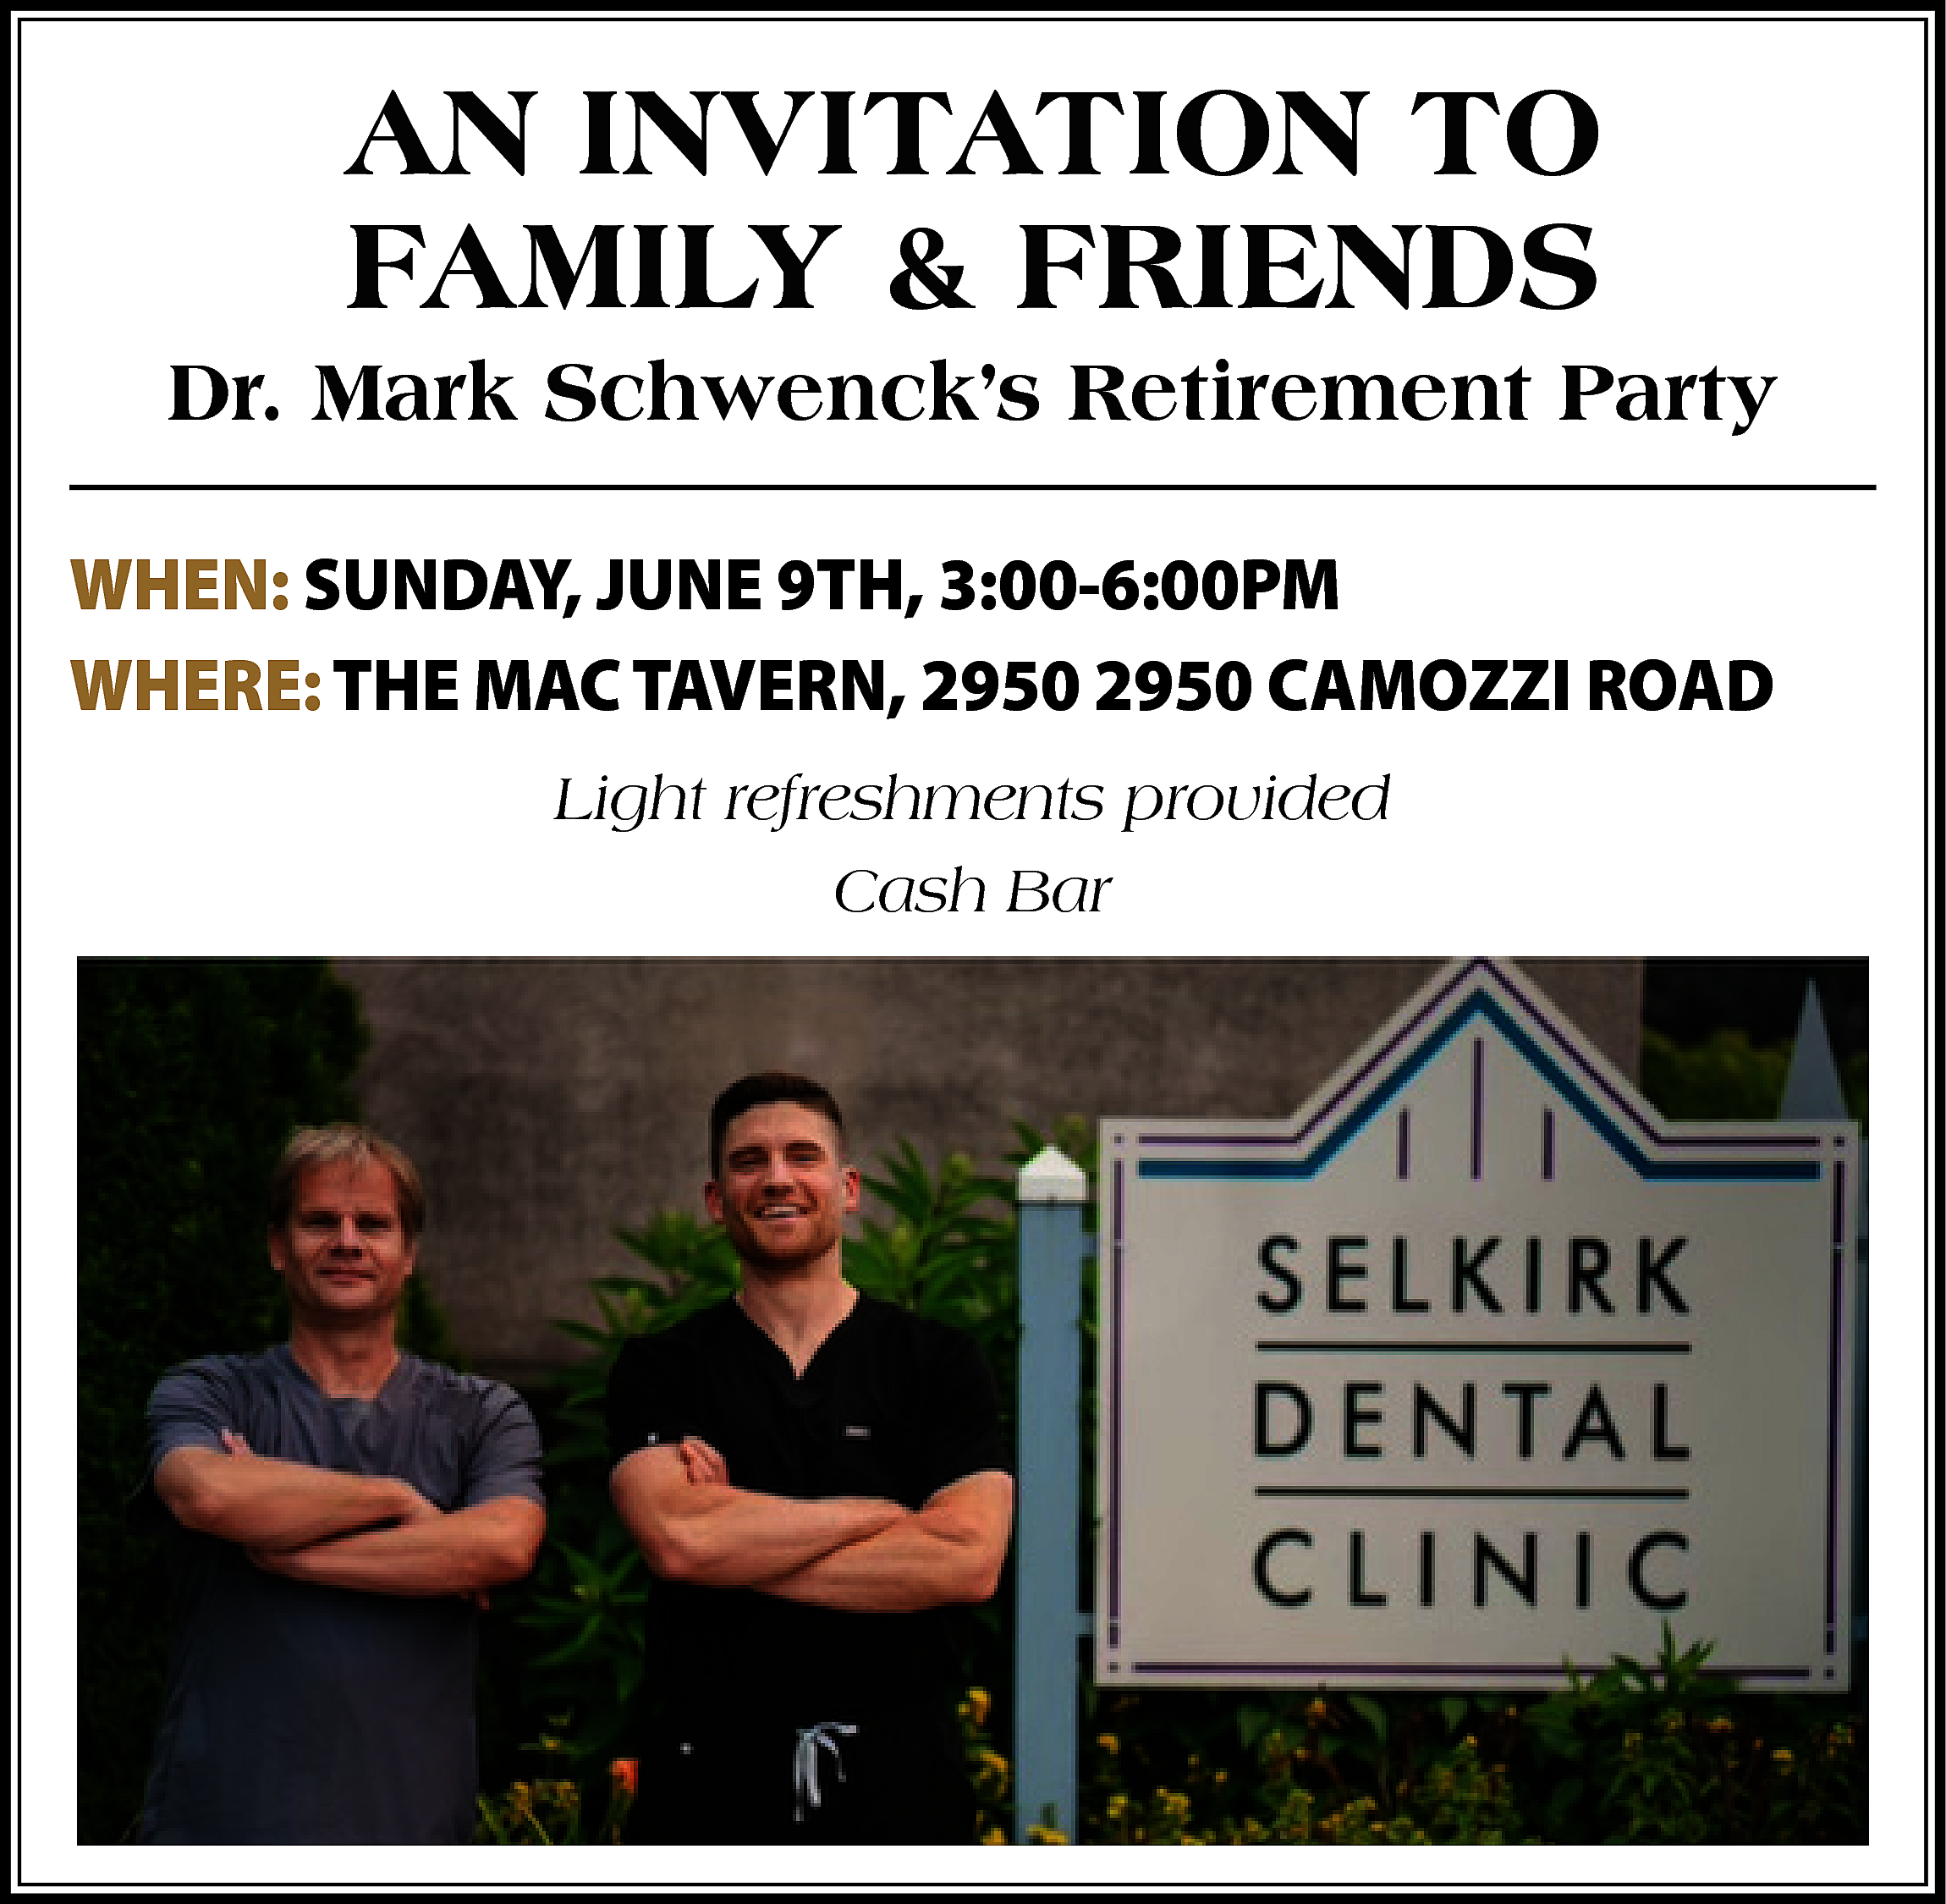 AN INVITATION TO <br>FAMILY &  AN INVITATION TO  FAMILY & FRIENDS  Dr. Mark Schwenck’s Retirement Party  WHEN: SUNDAY, JUNE 9TH, 3:00-6:00PM  WHERE: THE MAC TAVERN, 2950 2950 CAMOZZI ROAD  Light refreshments provided  Cash Bar    